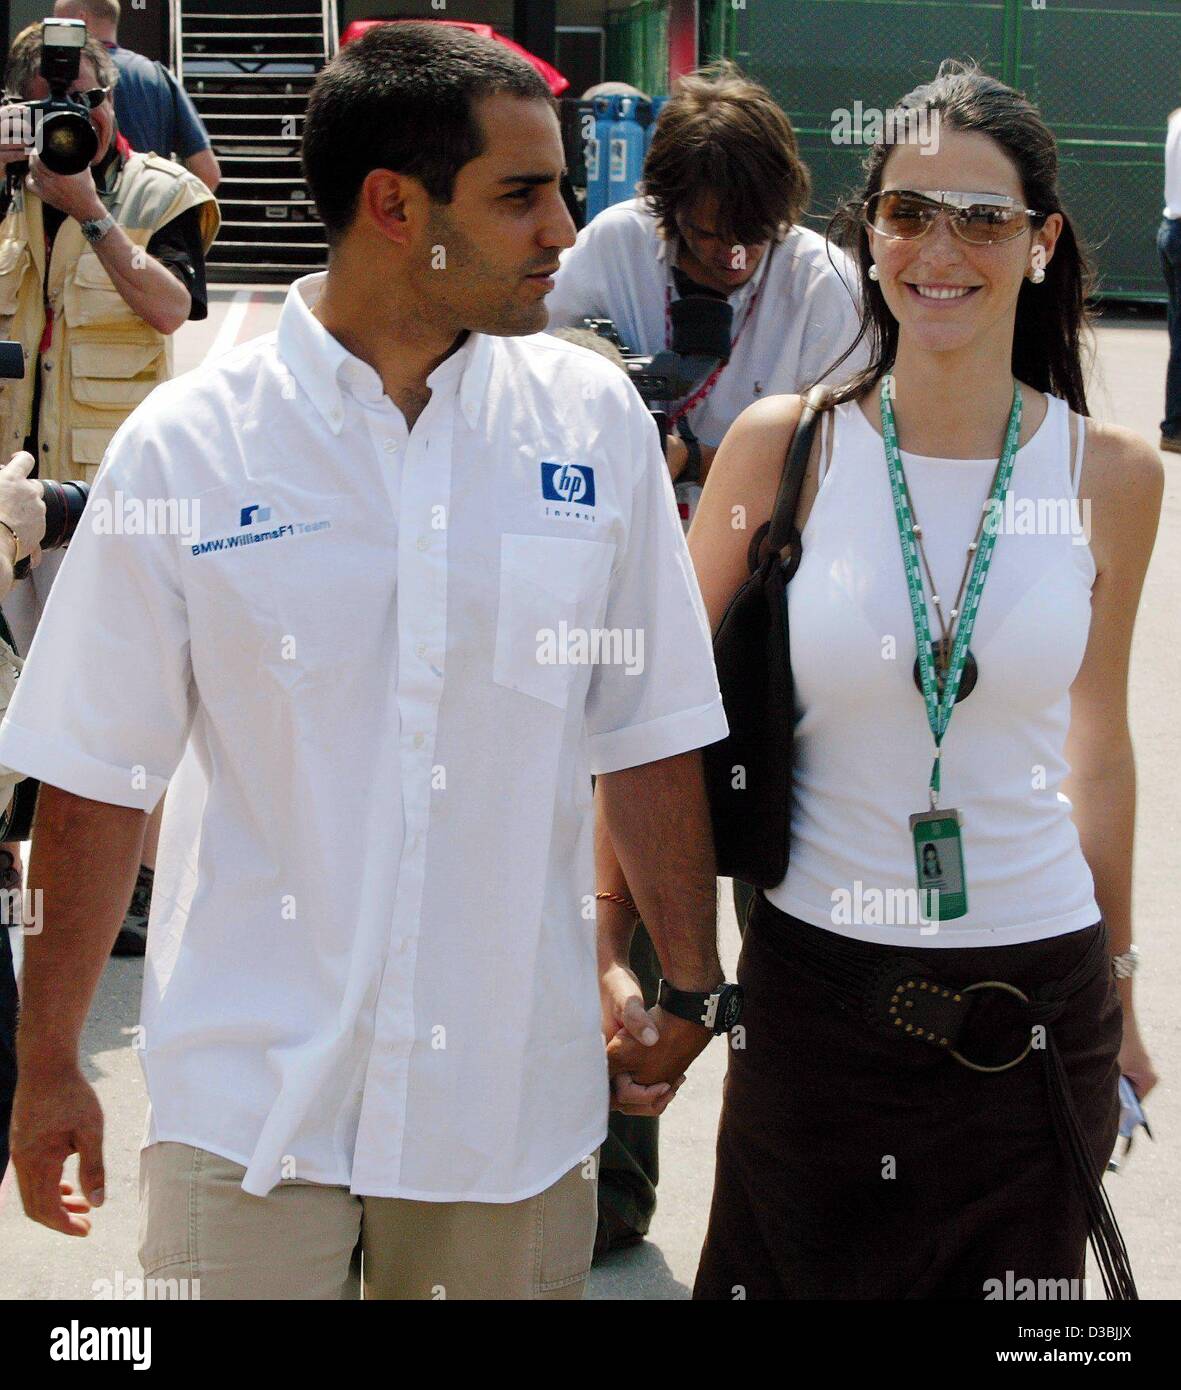 (dpa) - Colombian formula one driver Pablo Montoya (BMW-Williams) and his wife Connie hold hands and walk across the Interlagos formula one race track in Sao Paulo, Brazil, 3 April 2003. The Brazilian formula one grand prix is the third formula one race after the Australian and Malaysian grand prix  Stock Photo